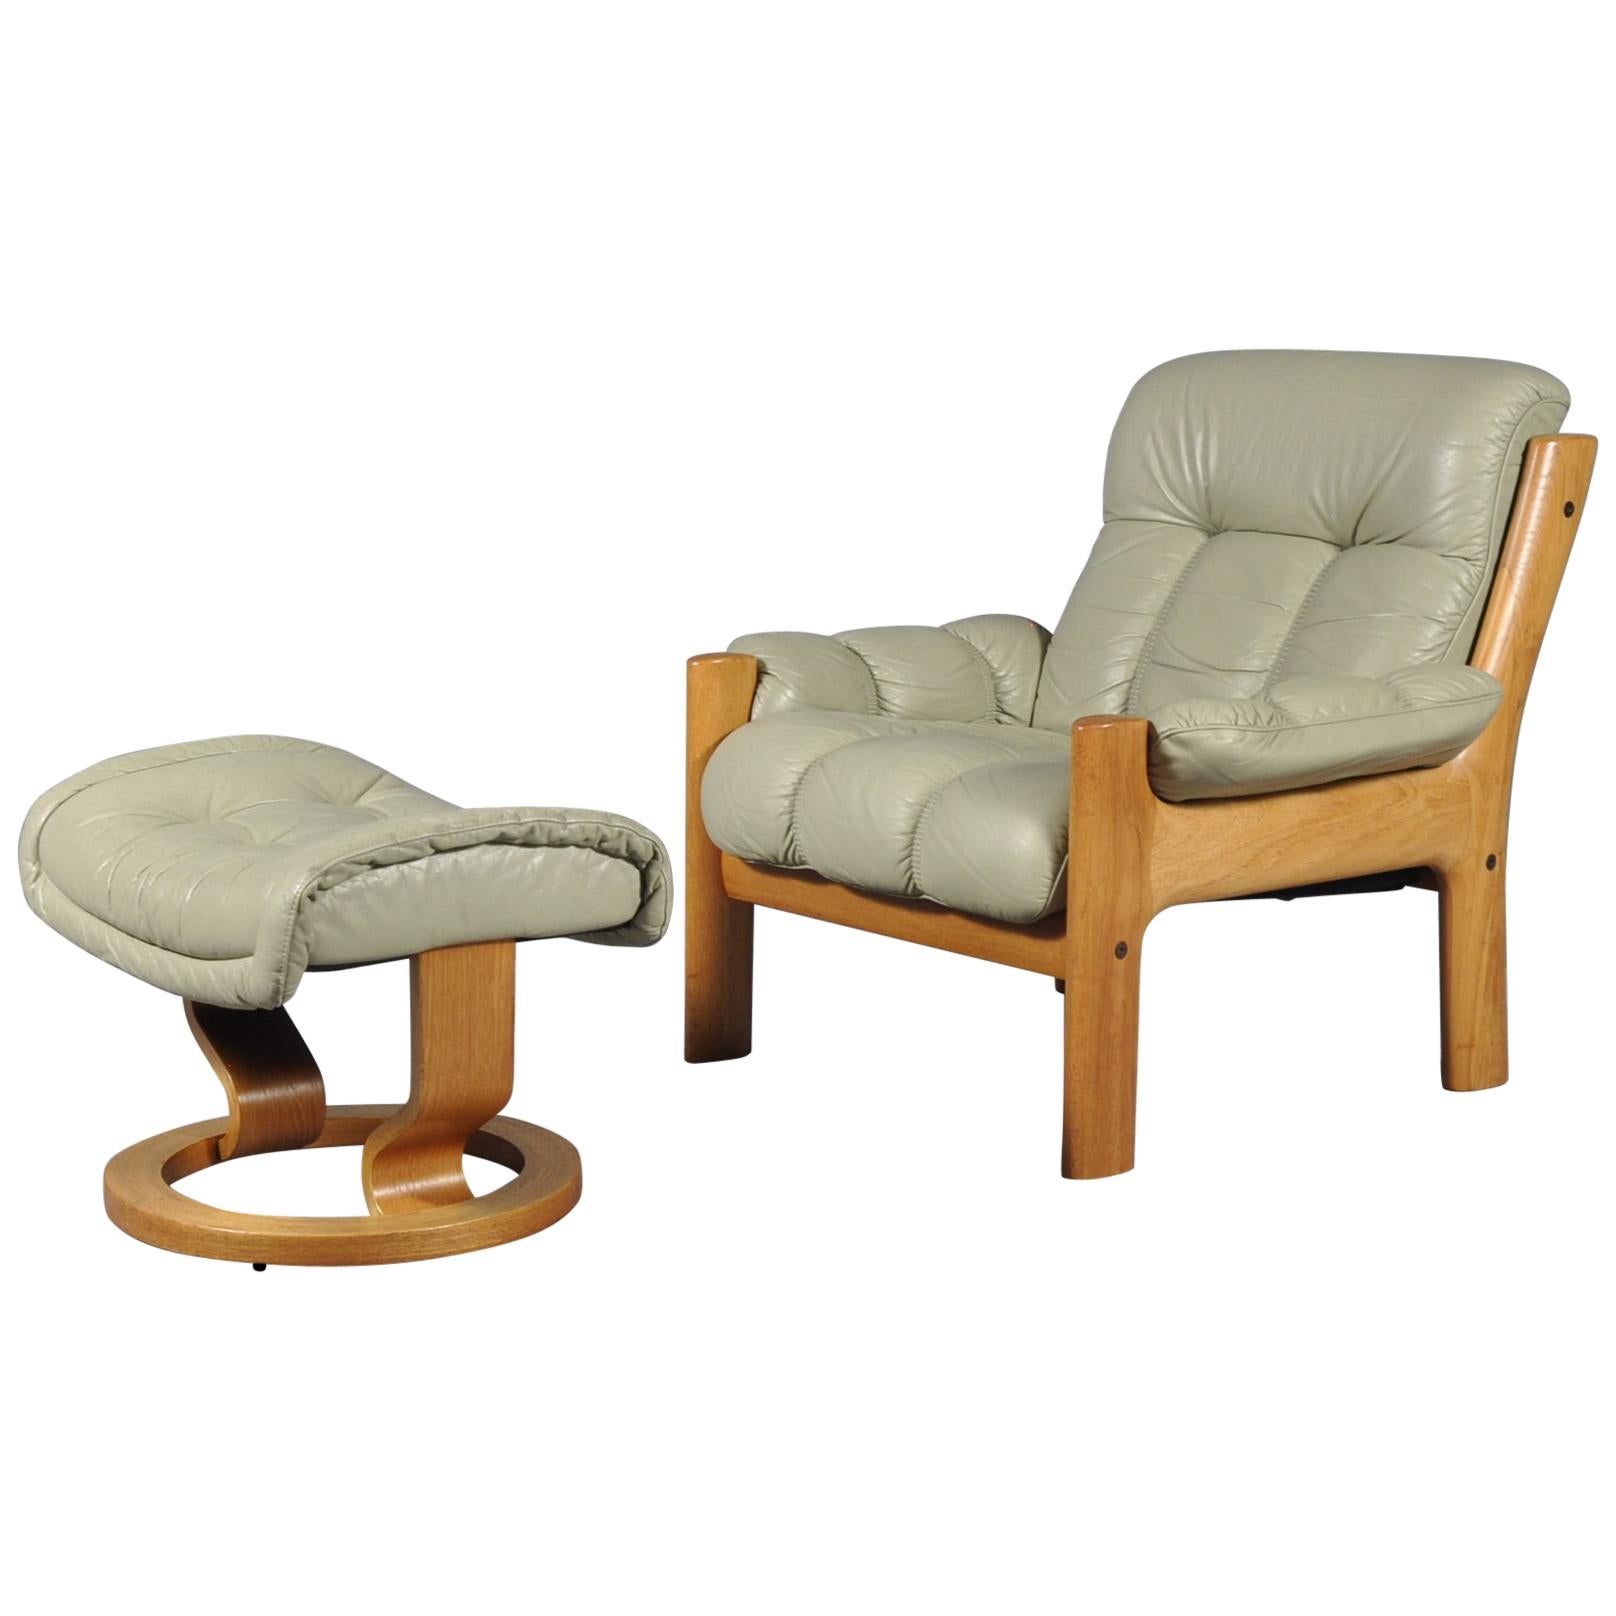 Montana Leather Lounge Chair and Ottoman by J.E. Ekornes, Norway, circa 1970s For Sale